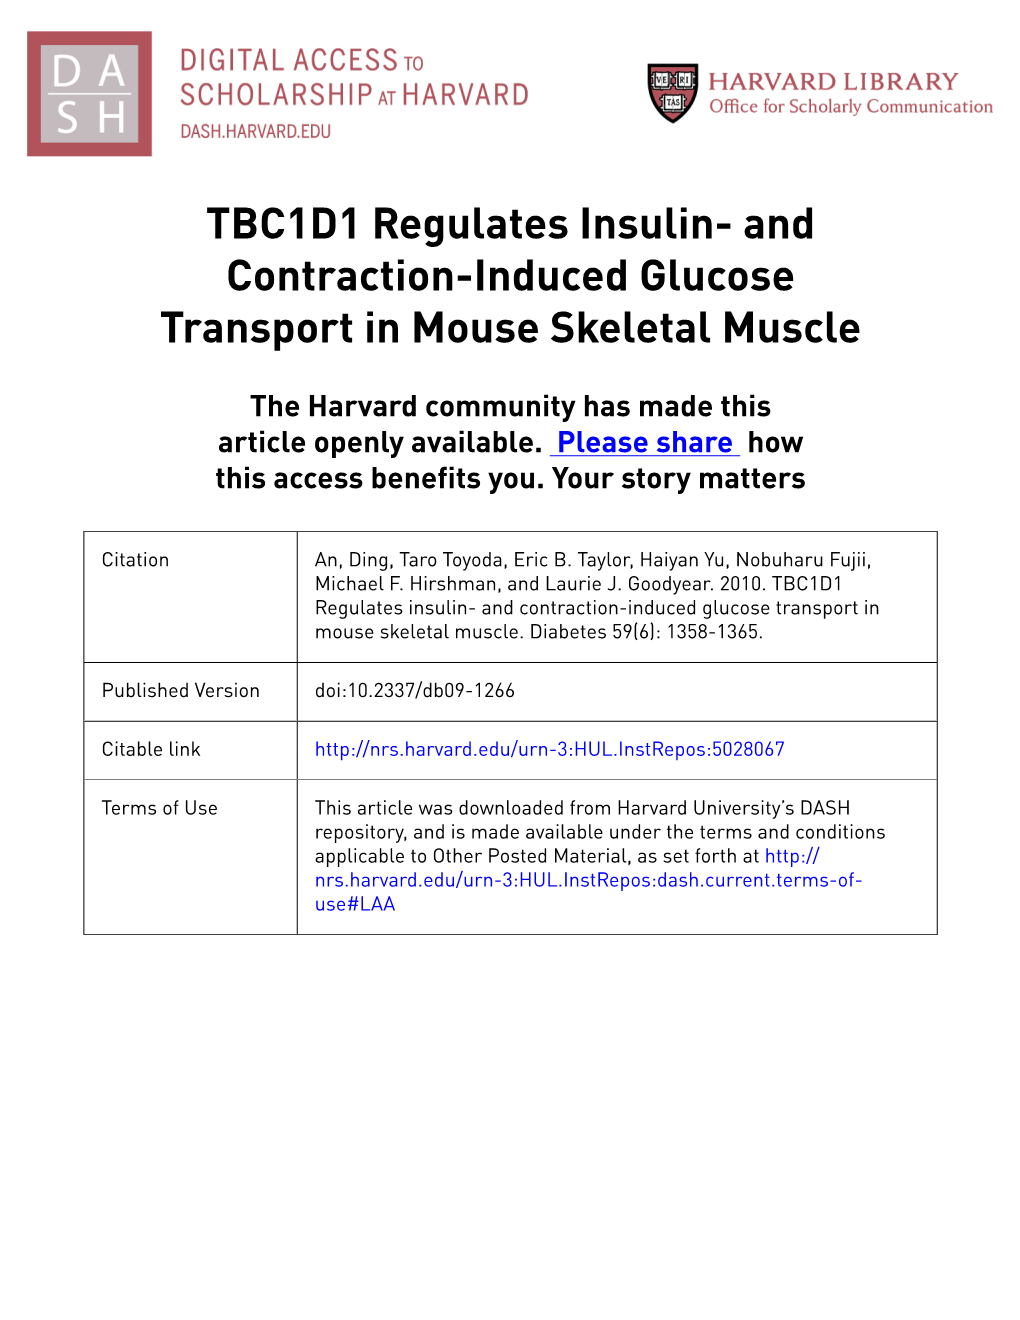 TBC1D1 Regulates Insulin- and Contraction-Induced Glucose Transport in Mouse Skeletal Muscle